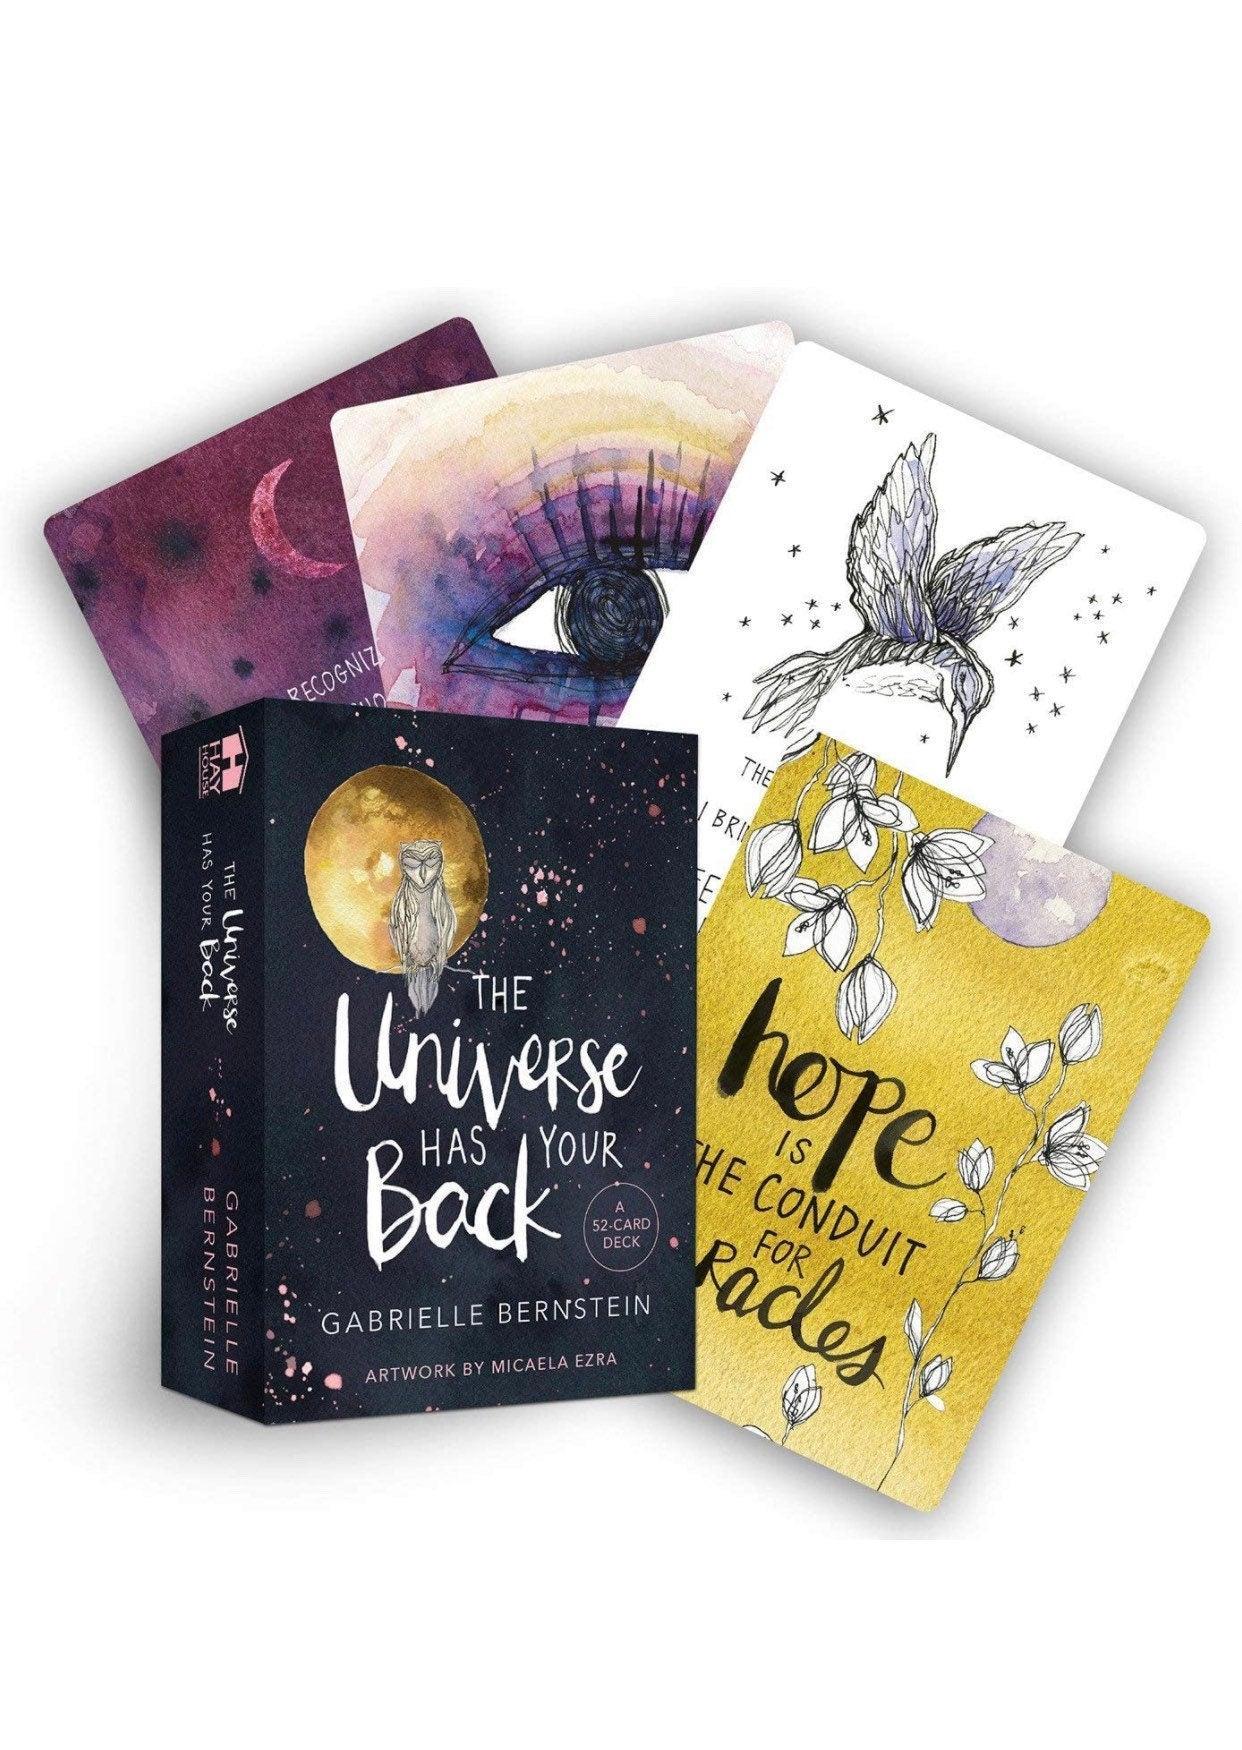 The Universe Has Your Back by Gabrielle Bernstein: Transform Fear to Faith and Guidebook, Original from England. - Blu Lunas Shoppe